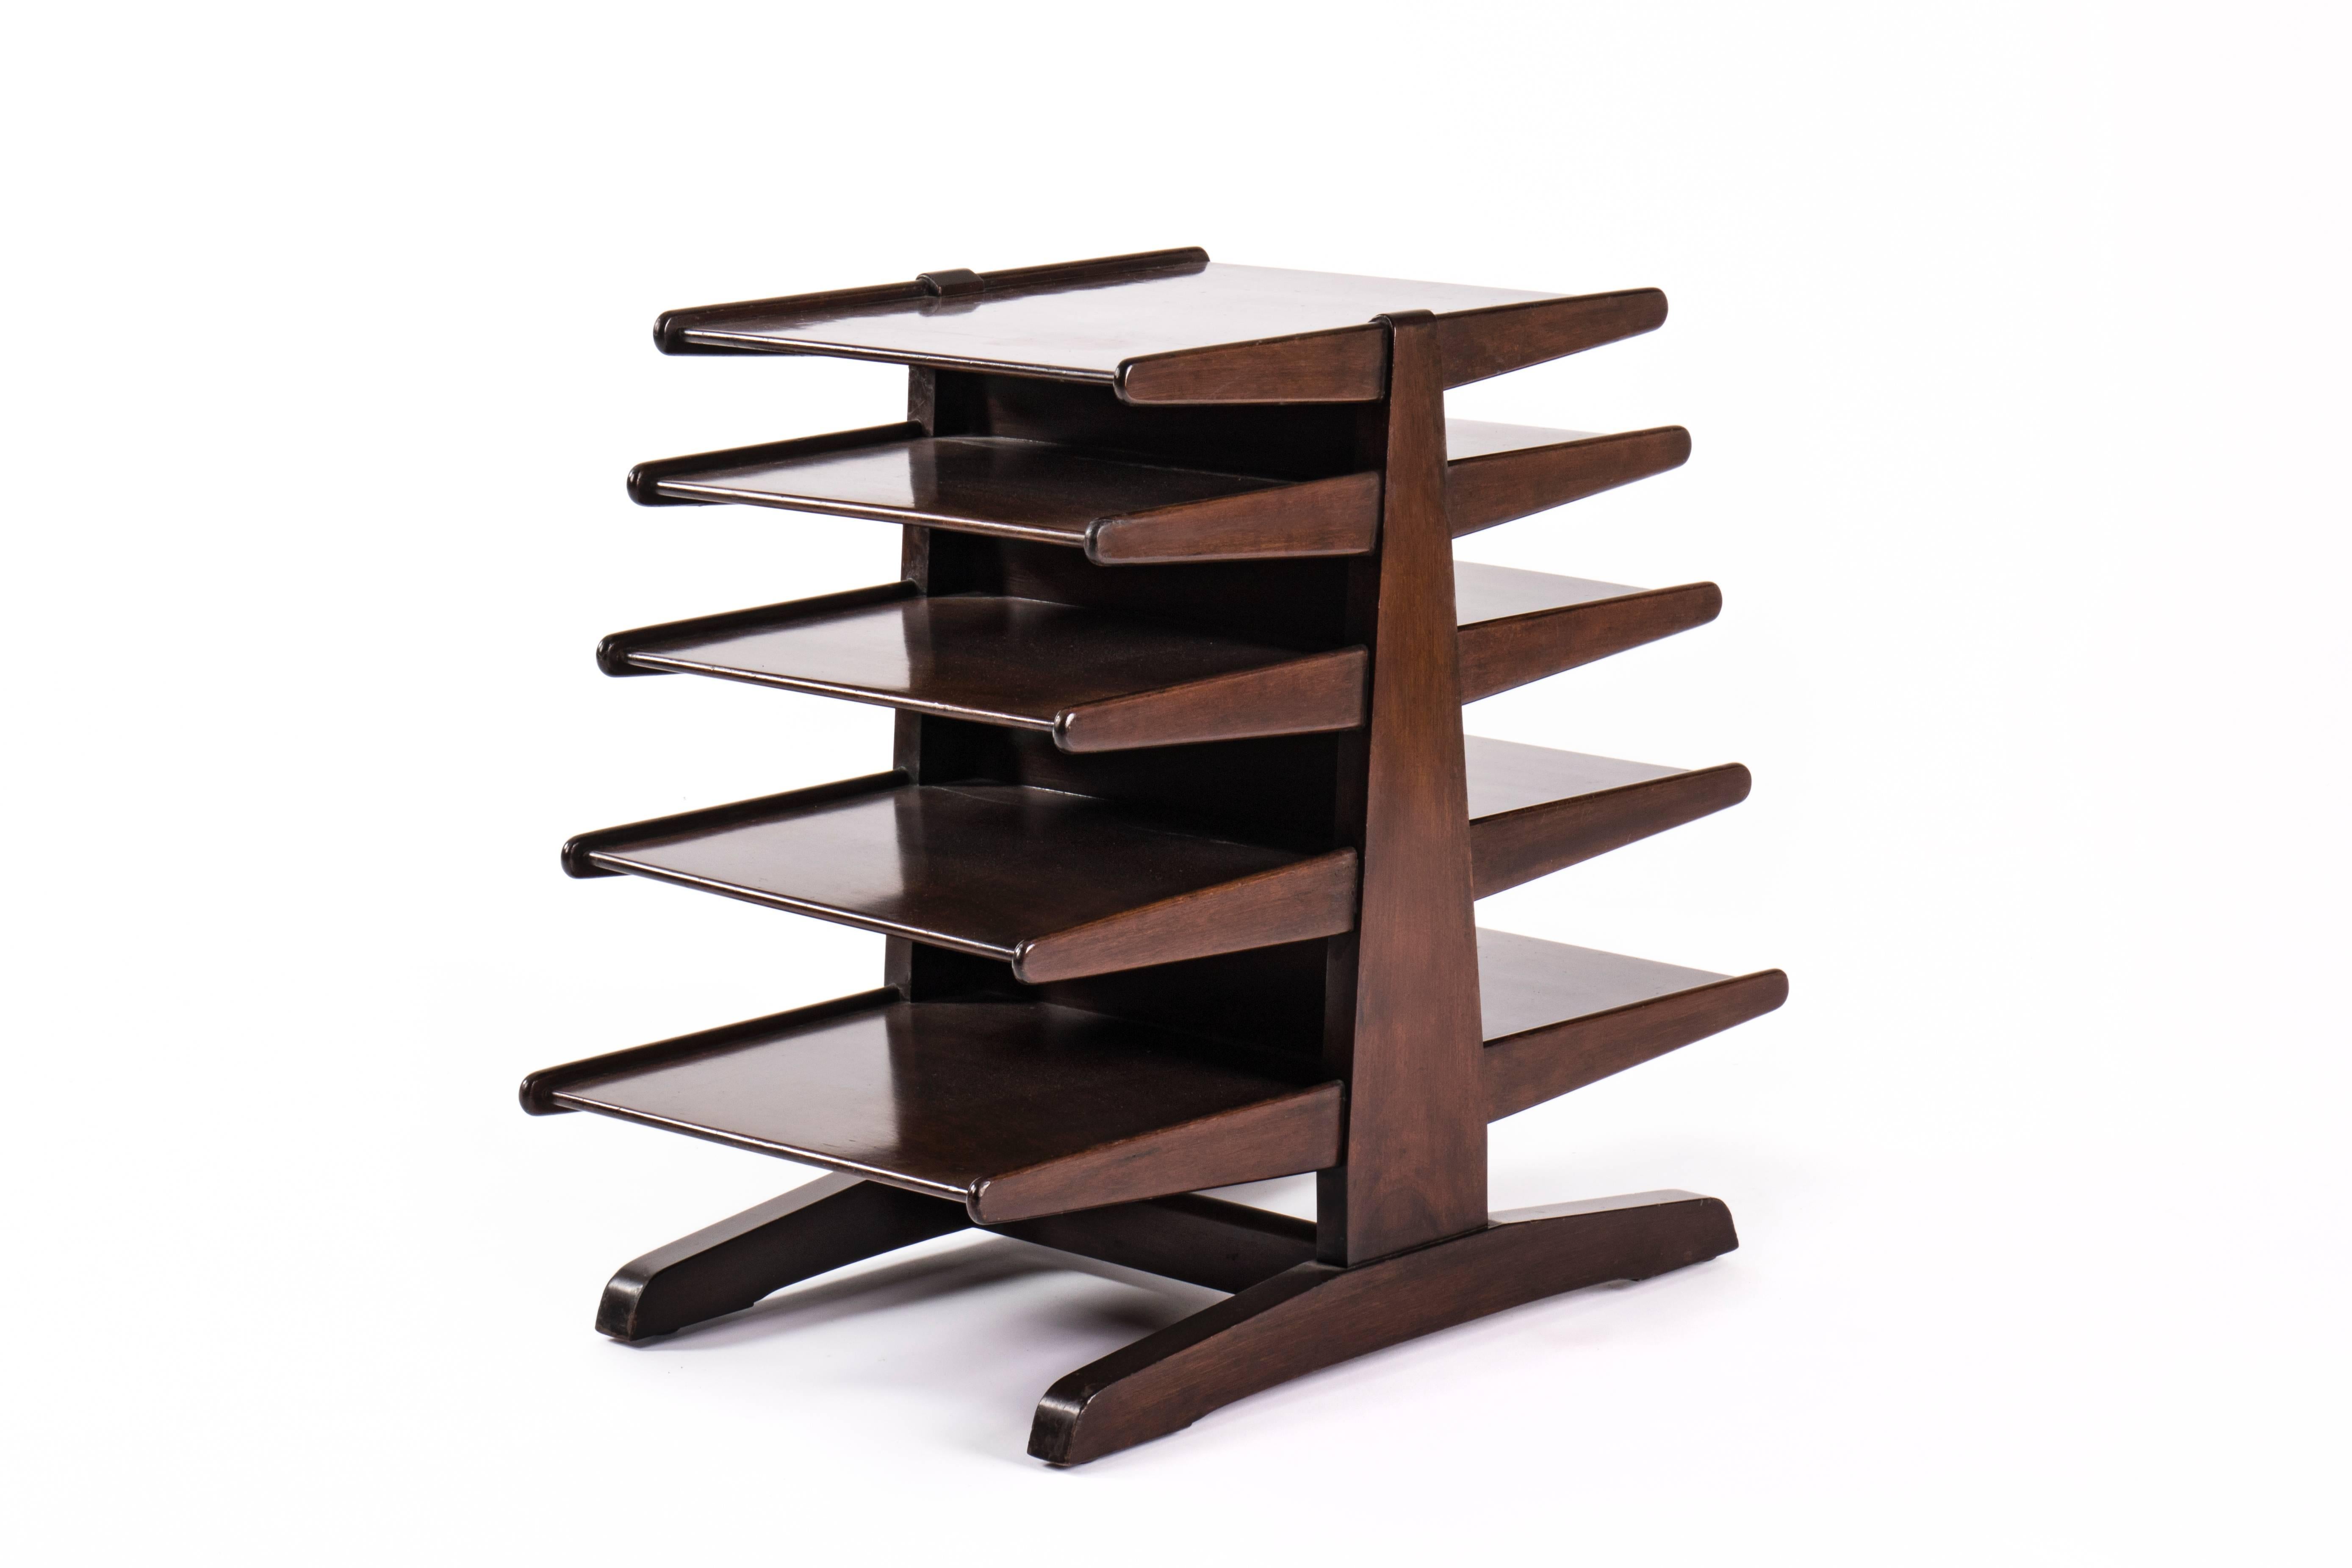 Edward Wormley for Dunbar magazine tree, model 4765.
Tiered layers allow multiple storage.

     